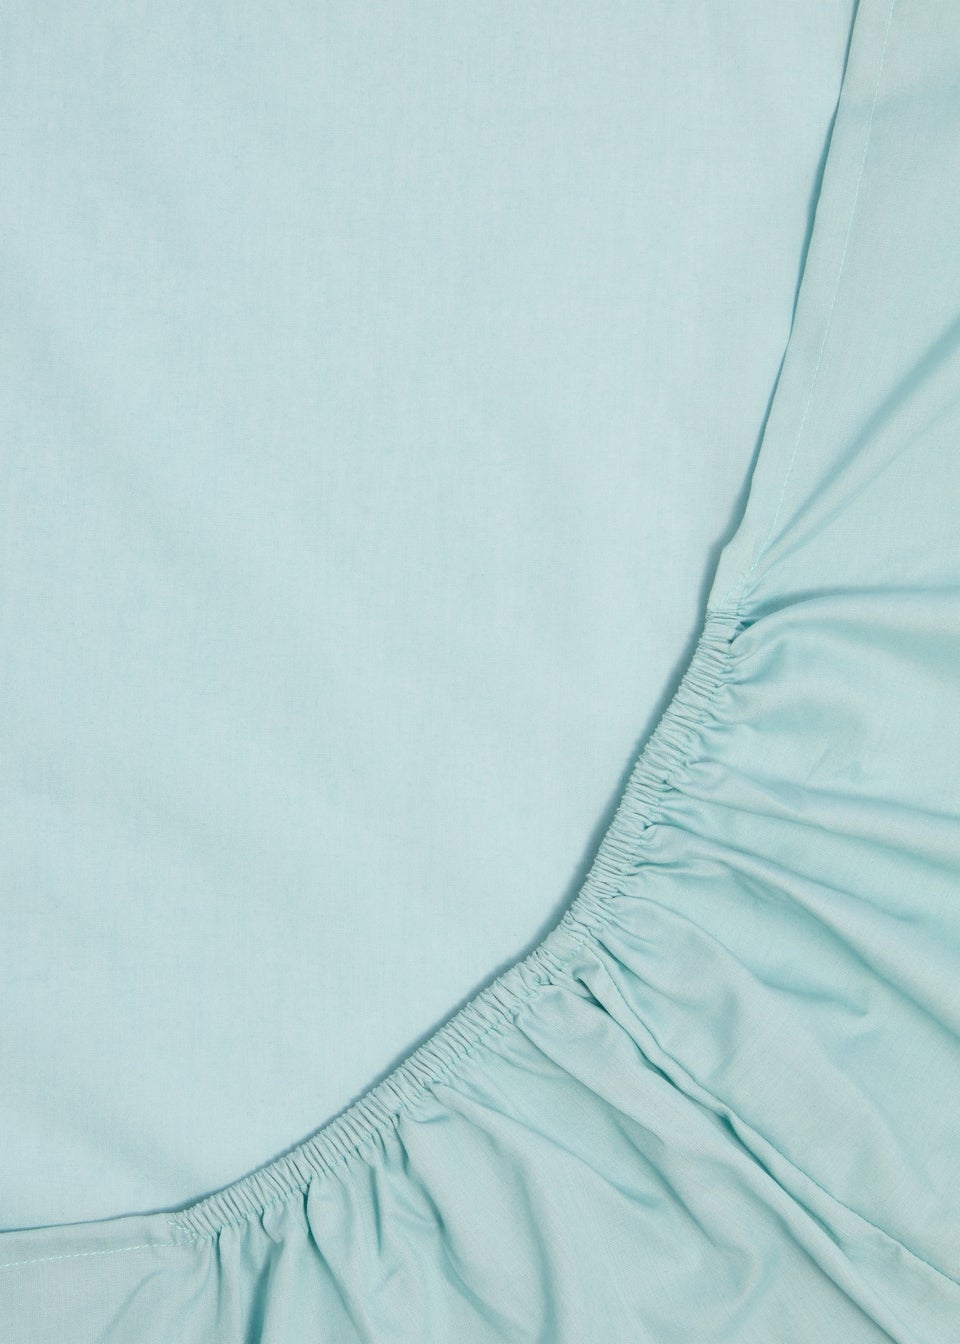 Blue Polycotton Fitted Bed Sheet ( 144 Thread Count)